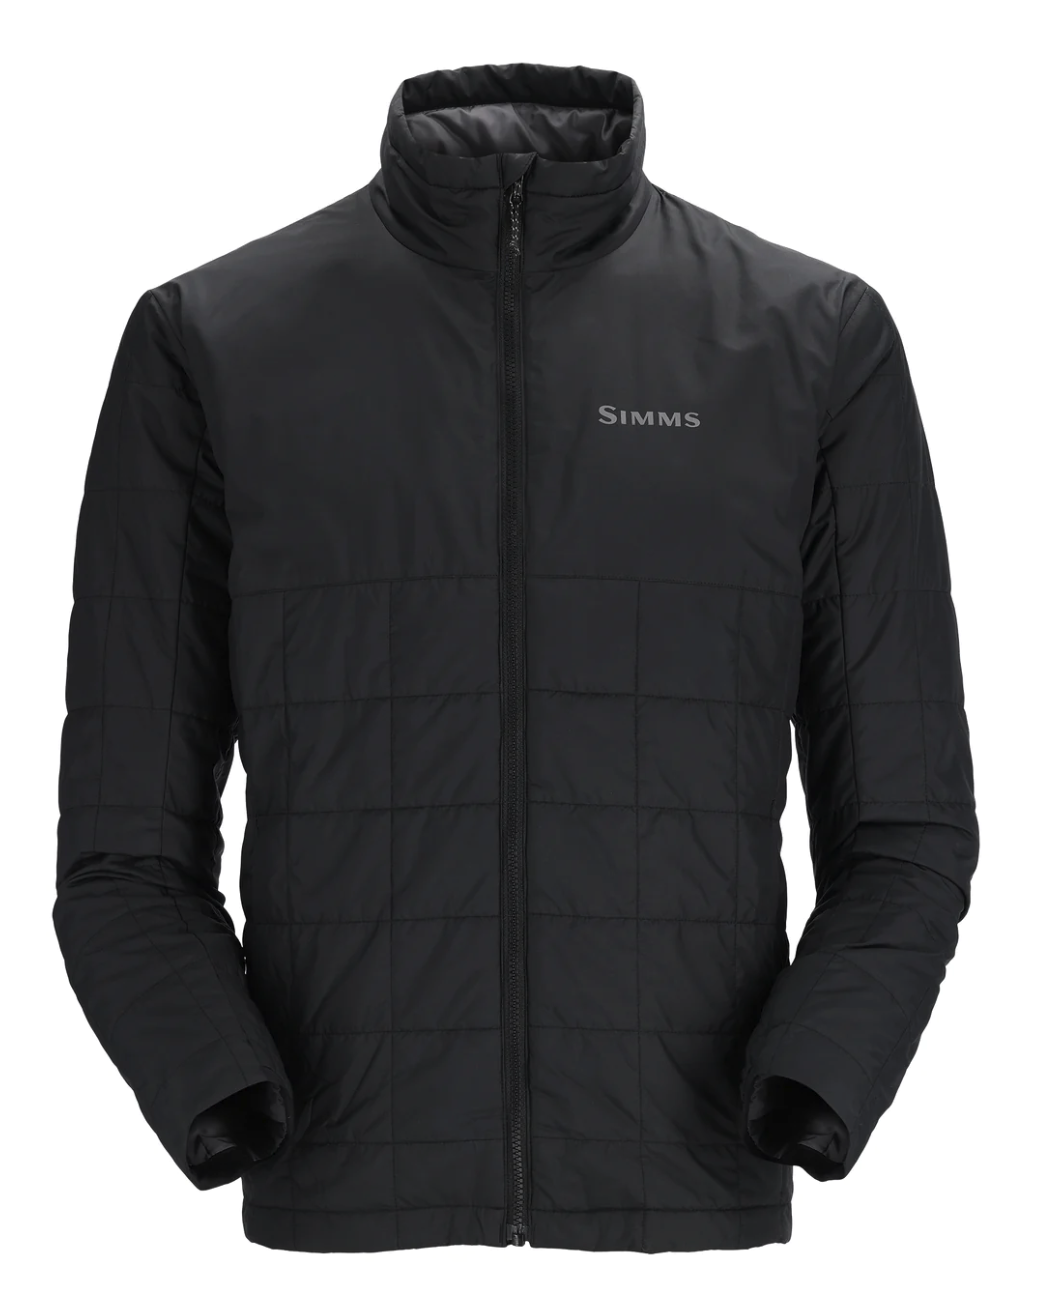 Order Simms Fall Run Collared Jacket online at TheFlyFishers.com